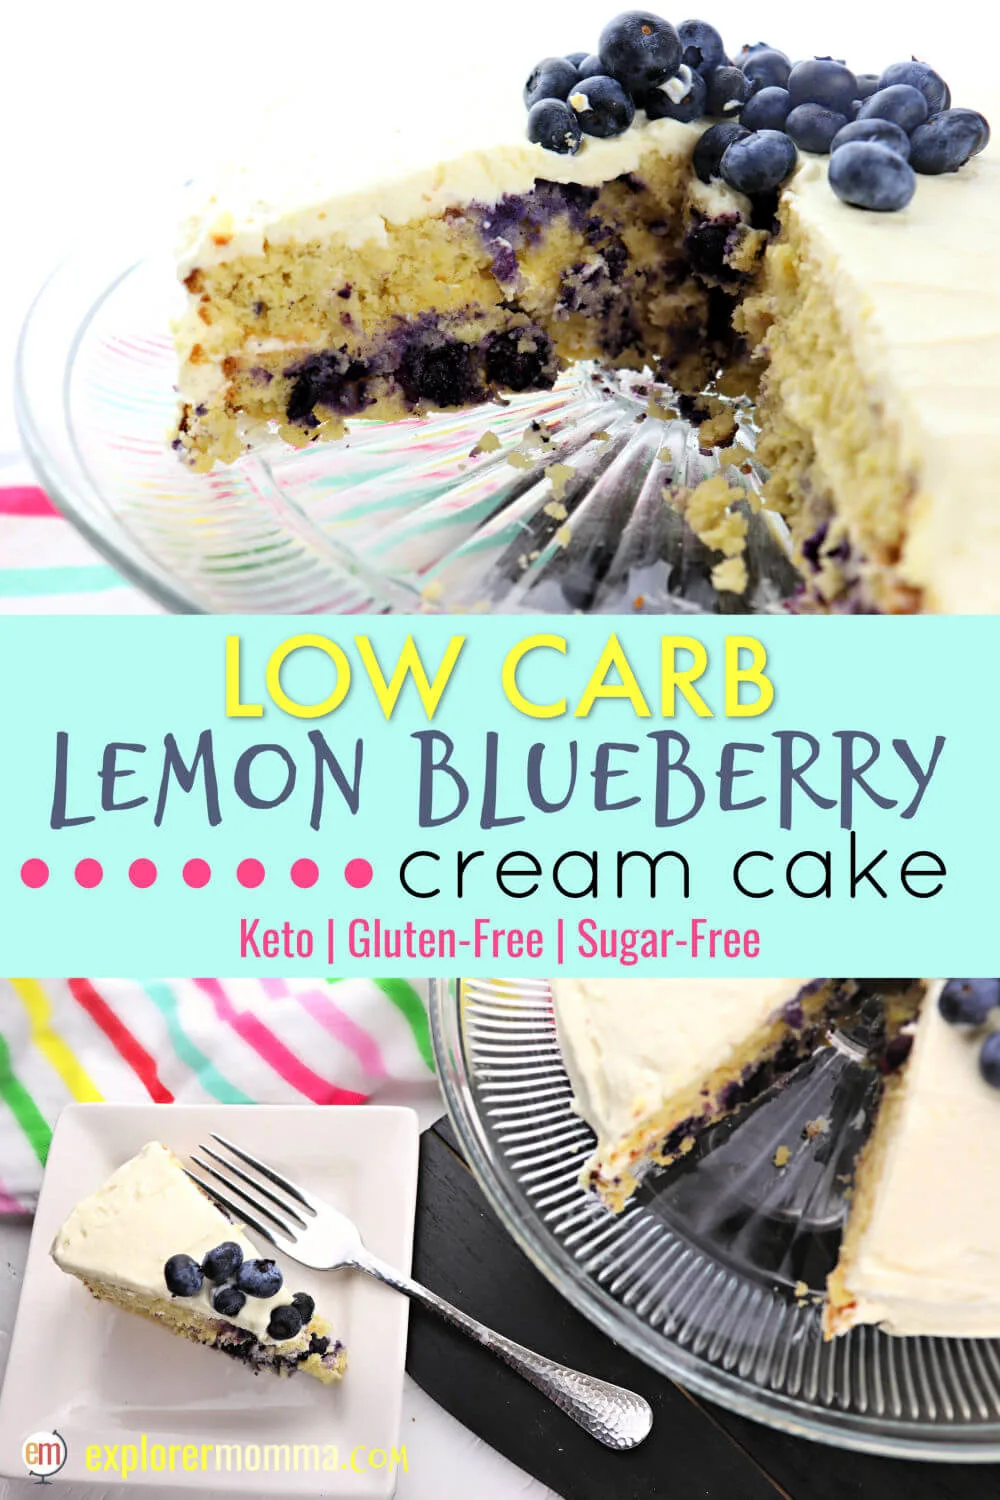 Luscious low carb lemon blueberry cream cake is an absolutely divine gluten-free, keto cake recipe. Sugar-free and with the tang of lemon, and blueberry flavor with cream. What could be better? #ketocake #lowcarbdesserts